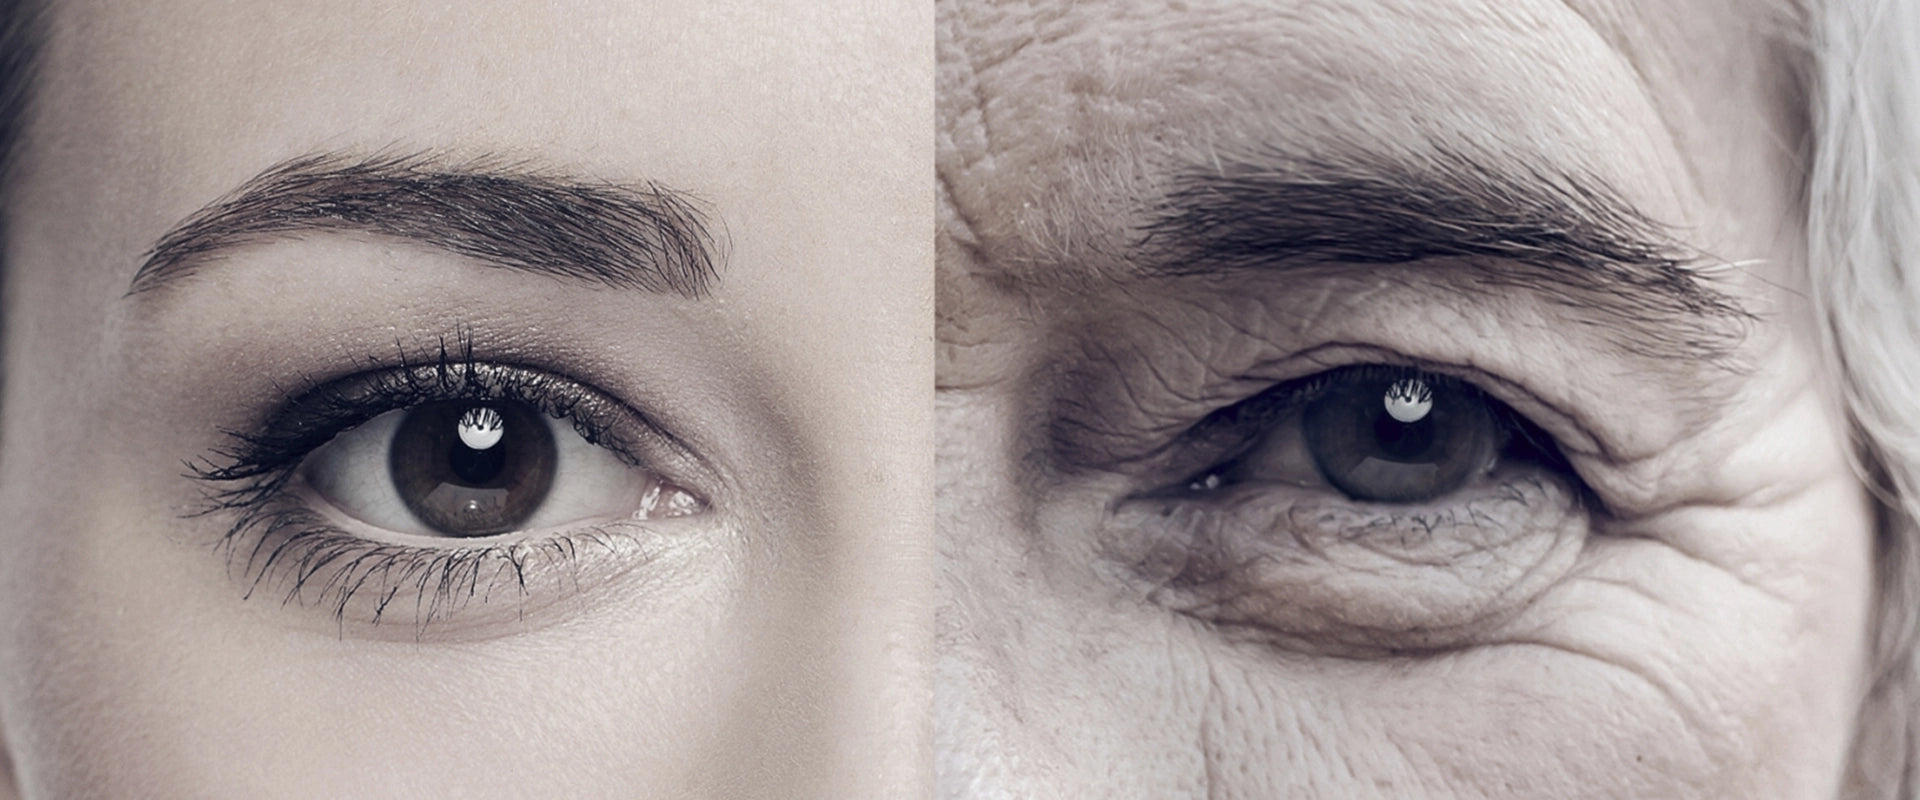 The Effects of Aging: Can They Be Reversed?